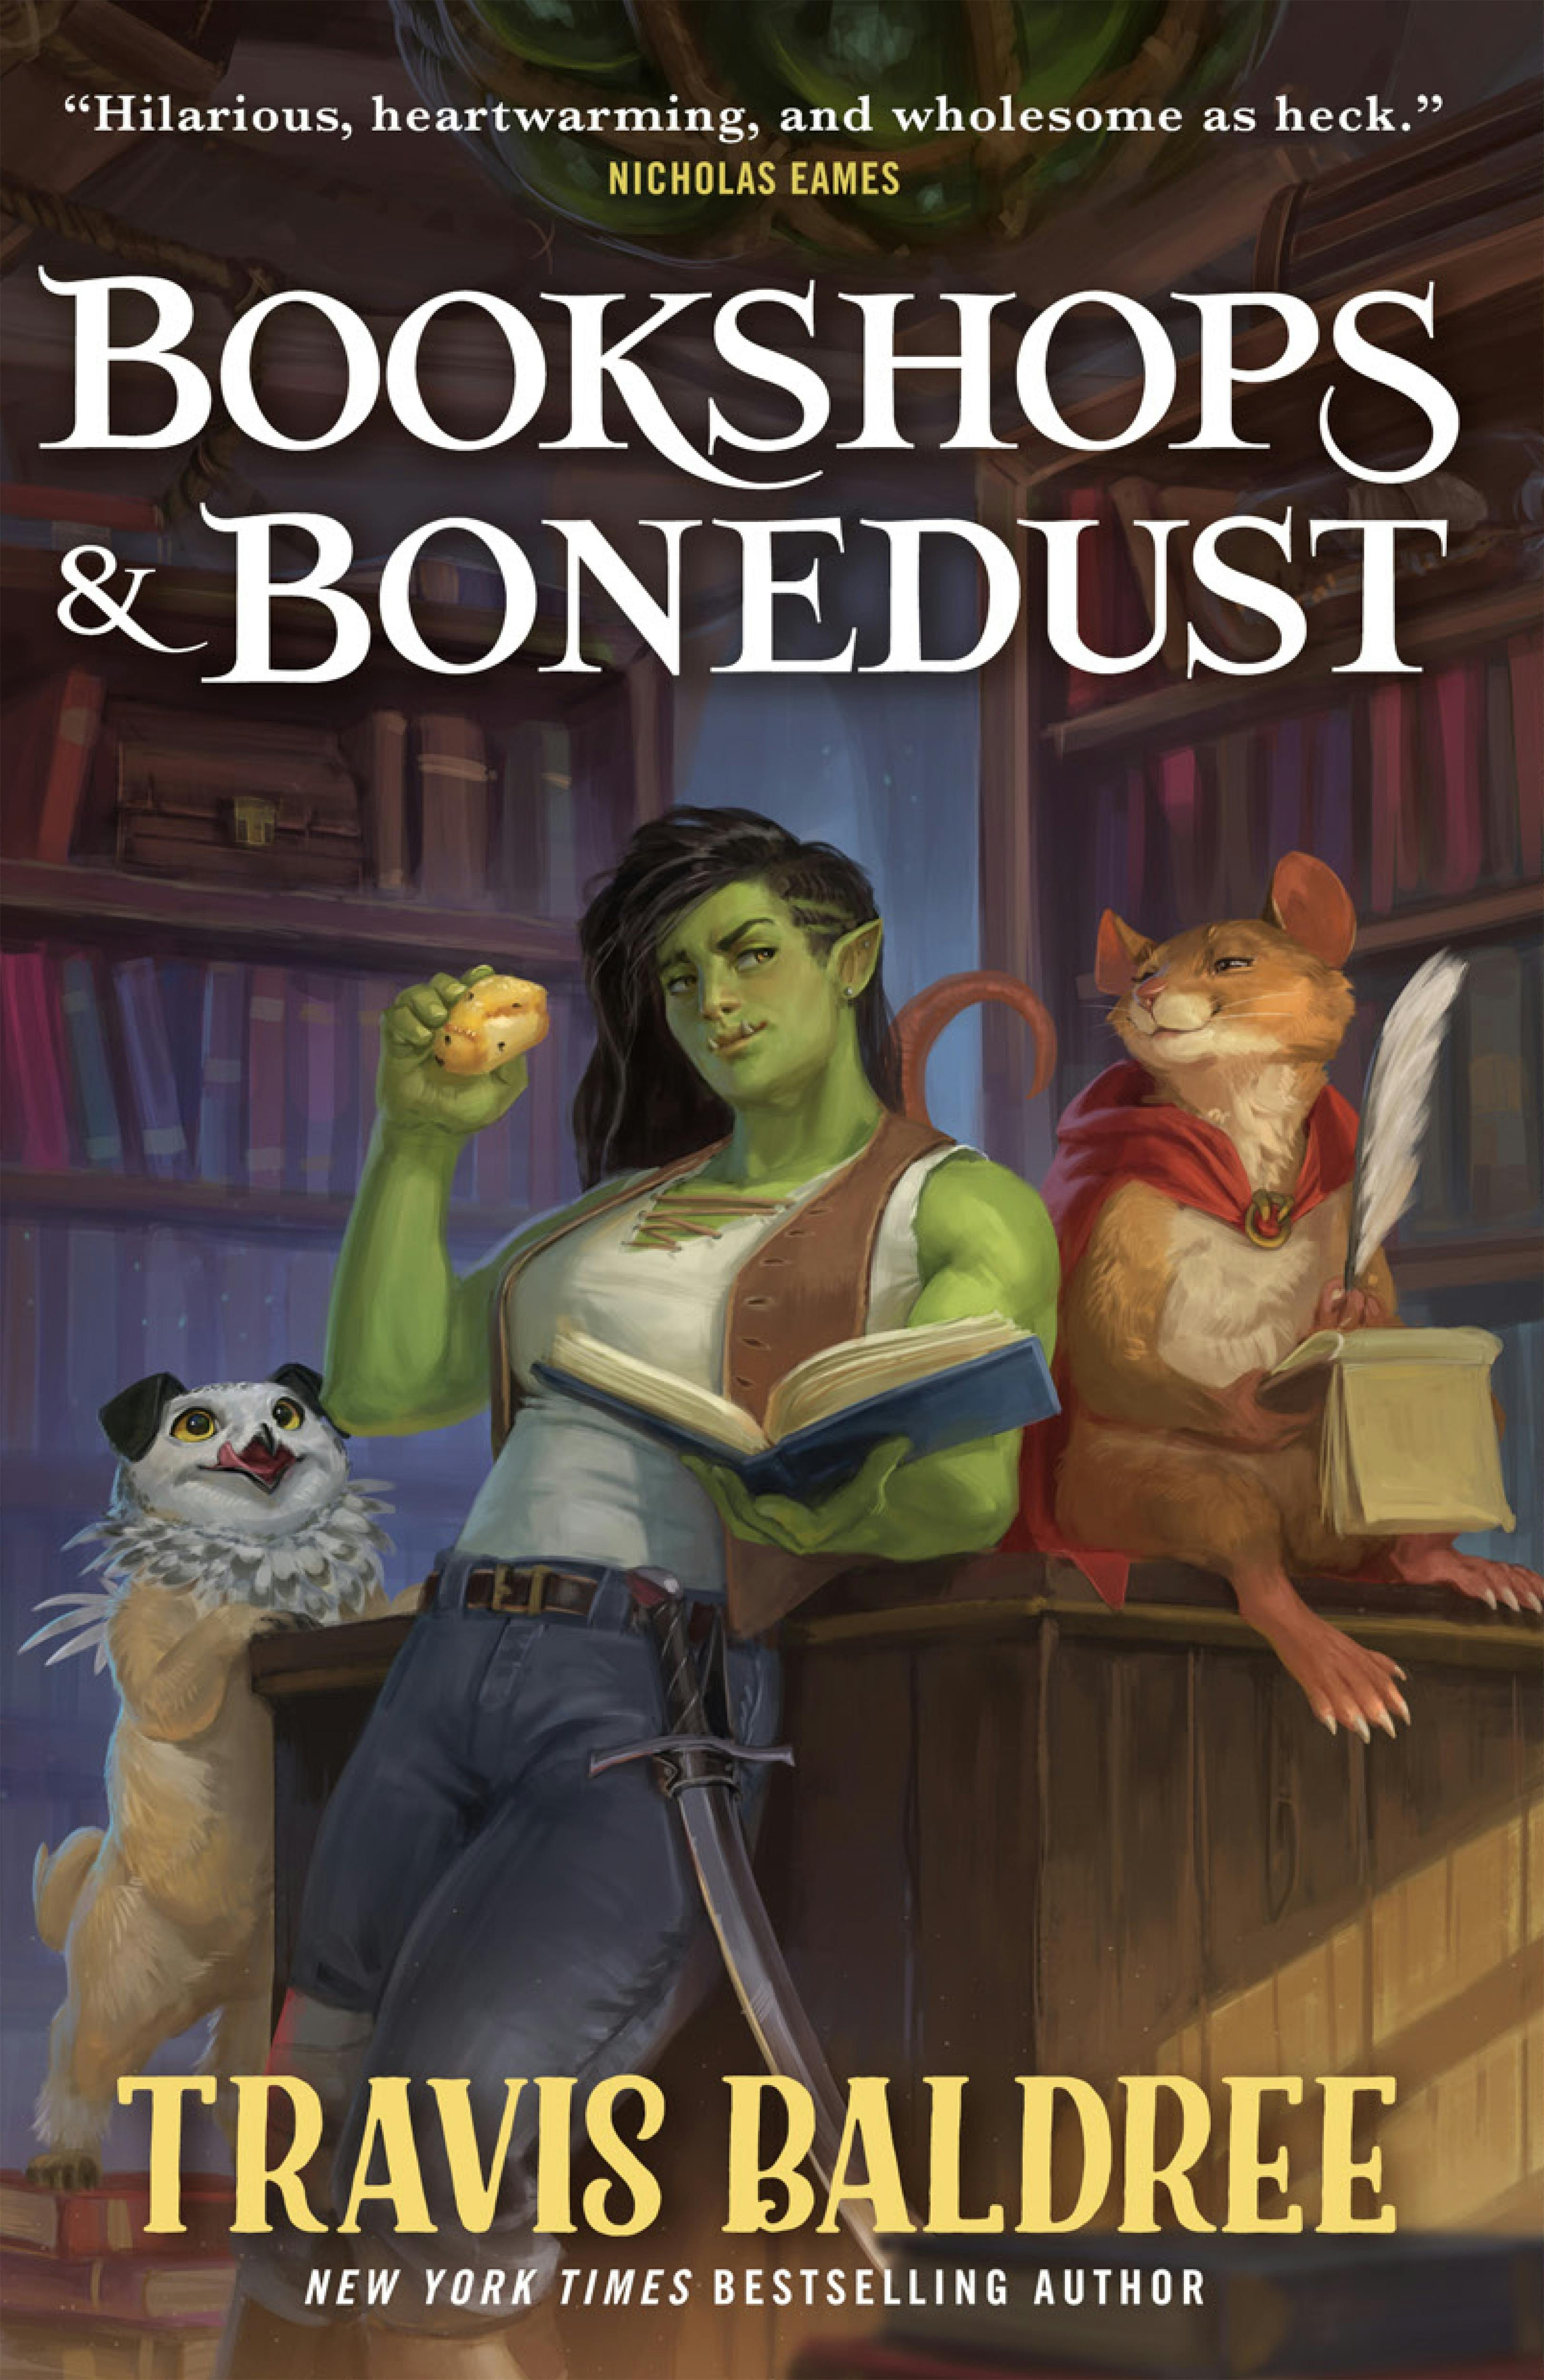 Cover for the book titled as: Bookshops & Bonedust